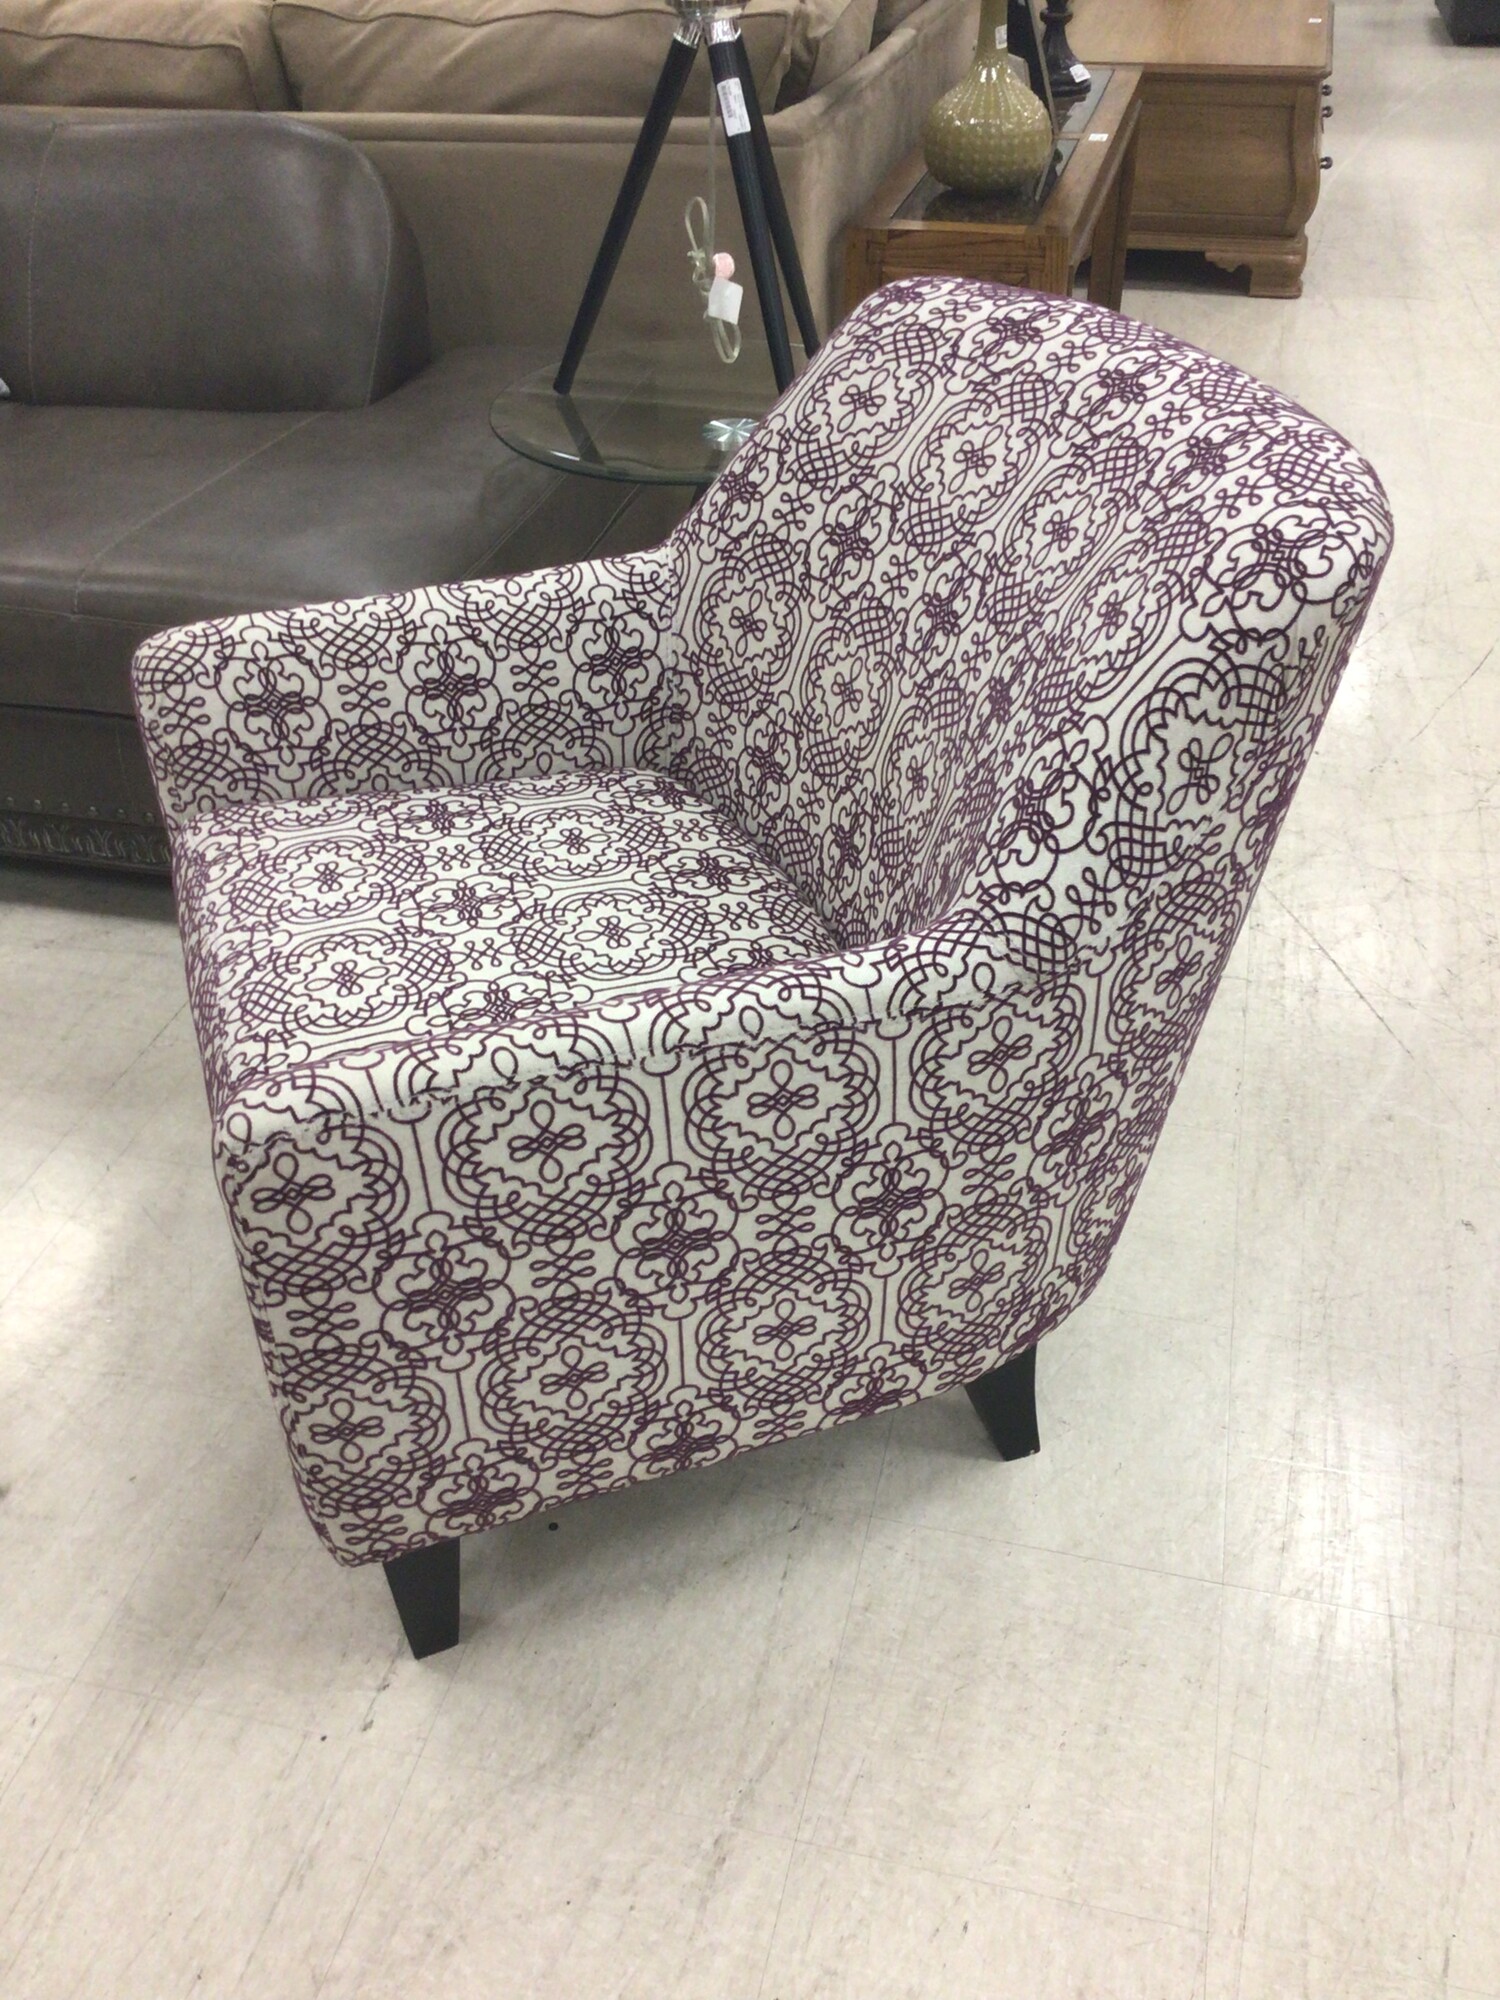 White/Purple Arm Chair, White, Squiggles
30in wide x 35in deep x 34in tall